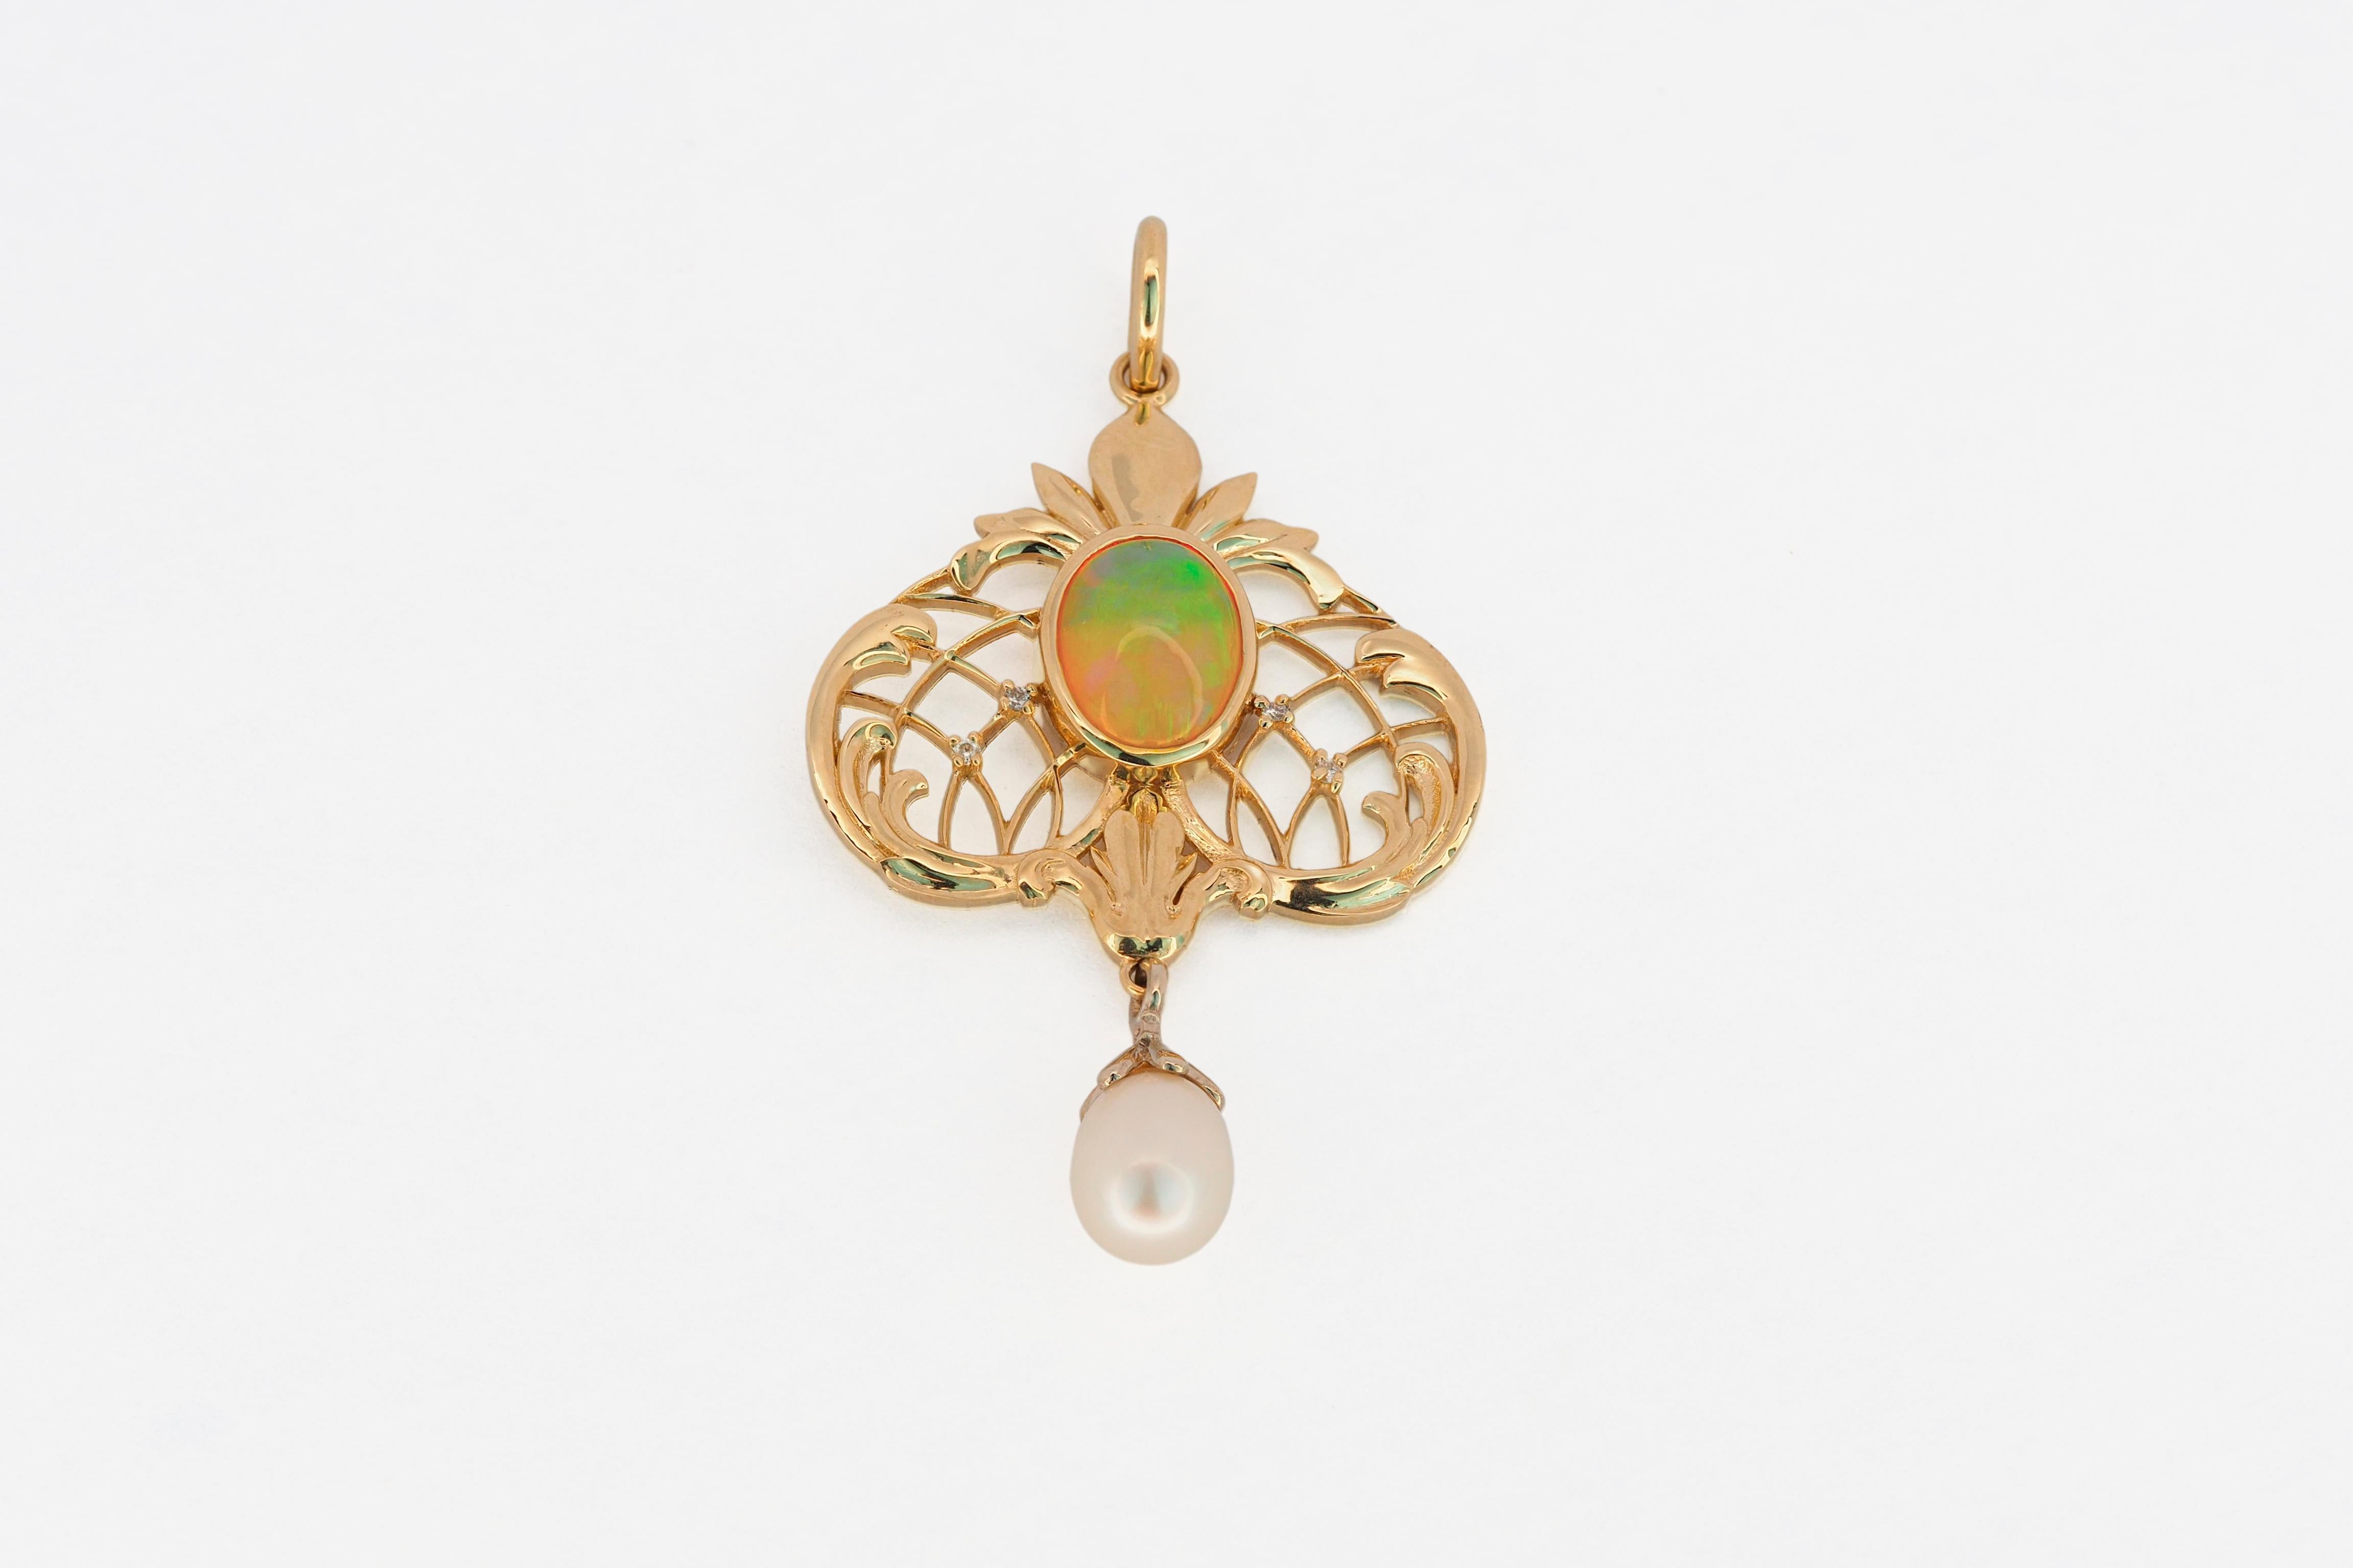 Cabochon Vintage style gold pendant with opal, pearl, diamonds. For Sale